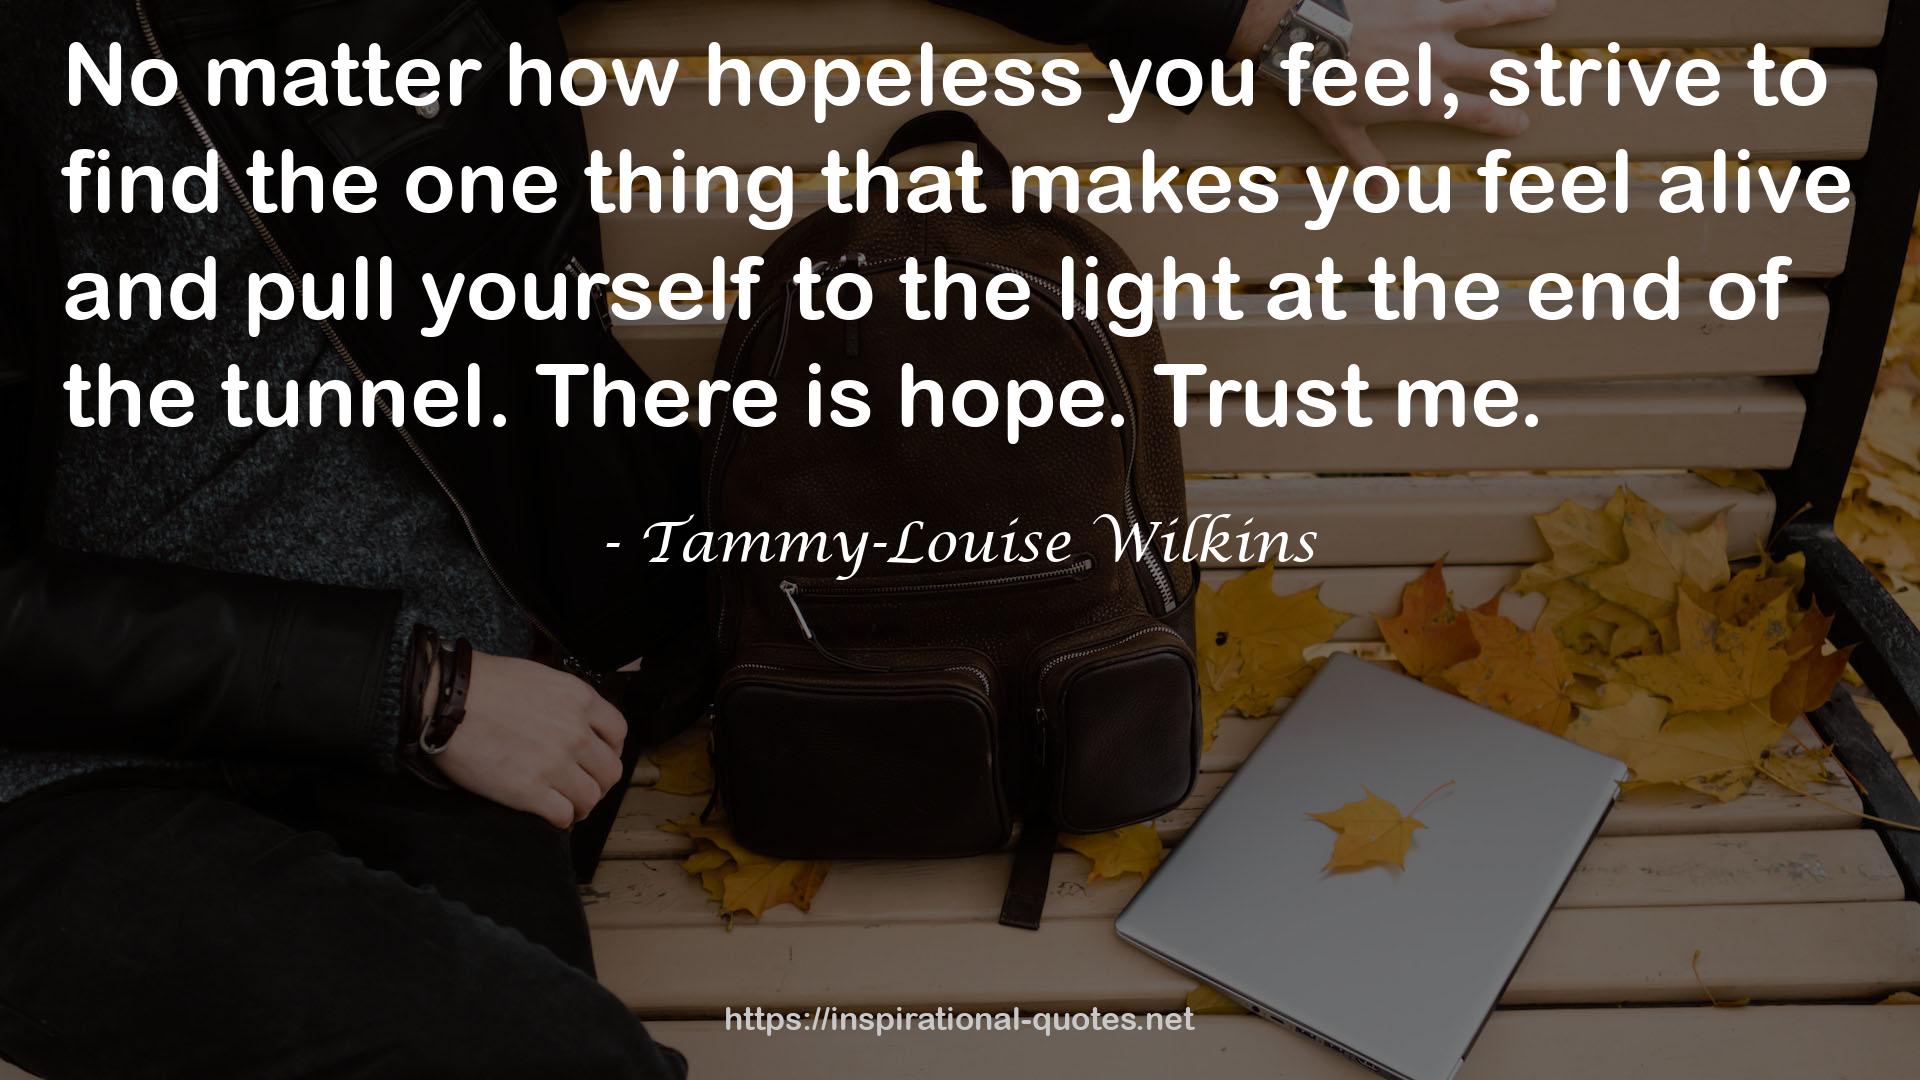 Tammy-Louise Wilkins QUOTES